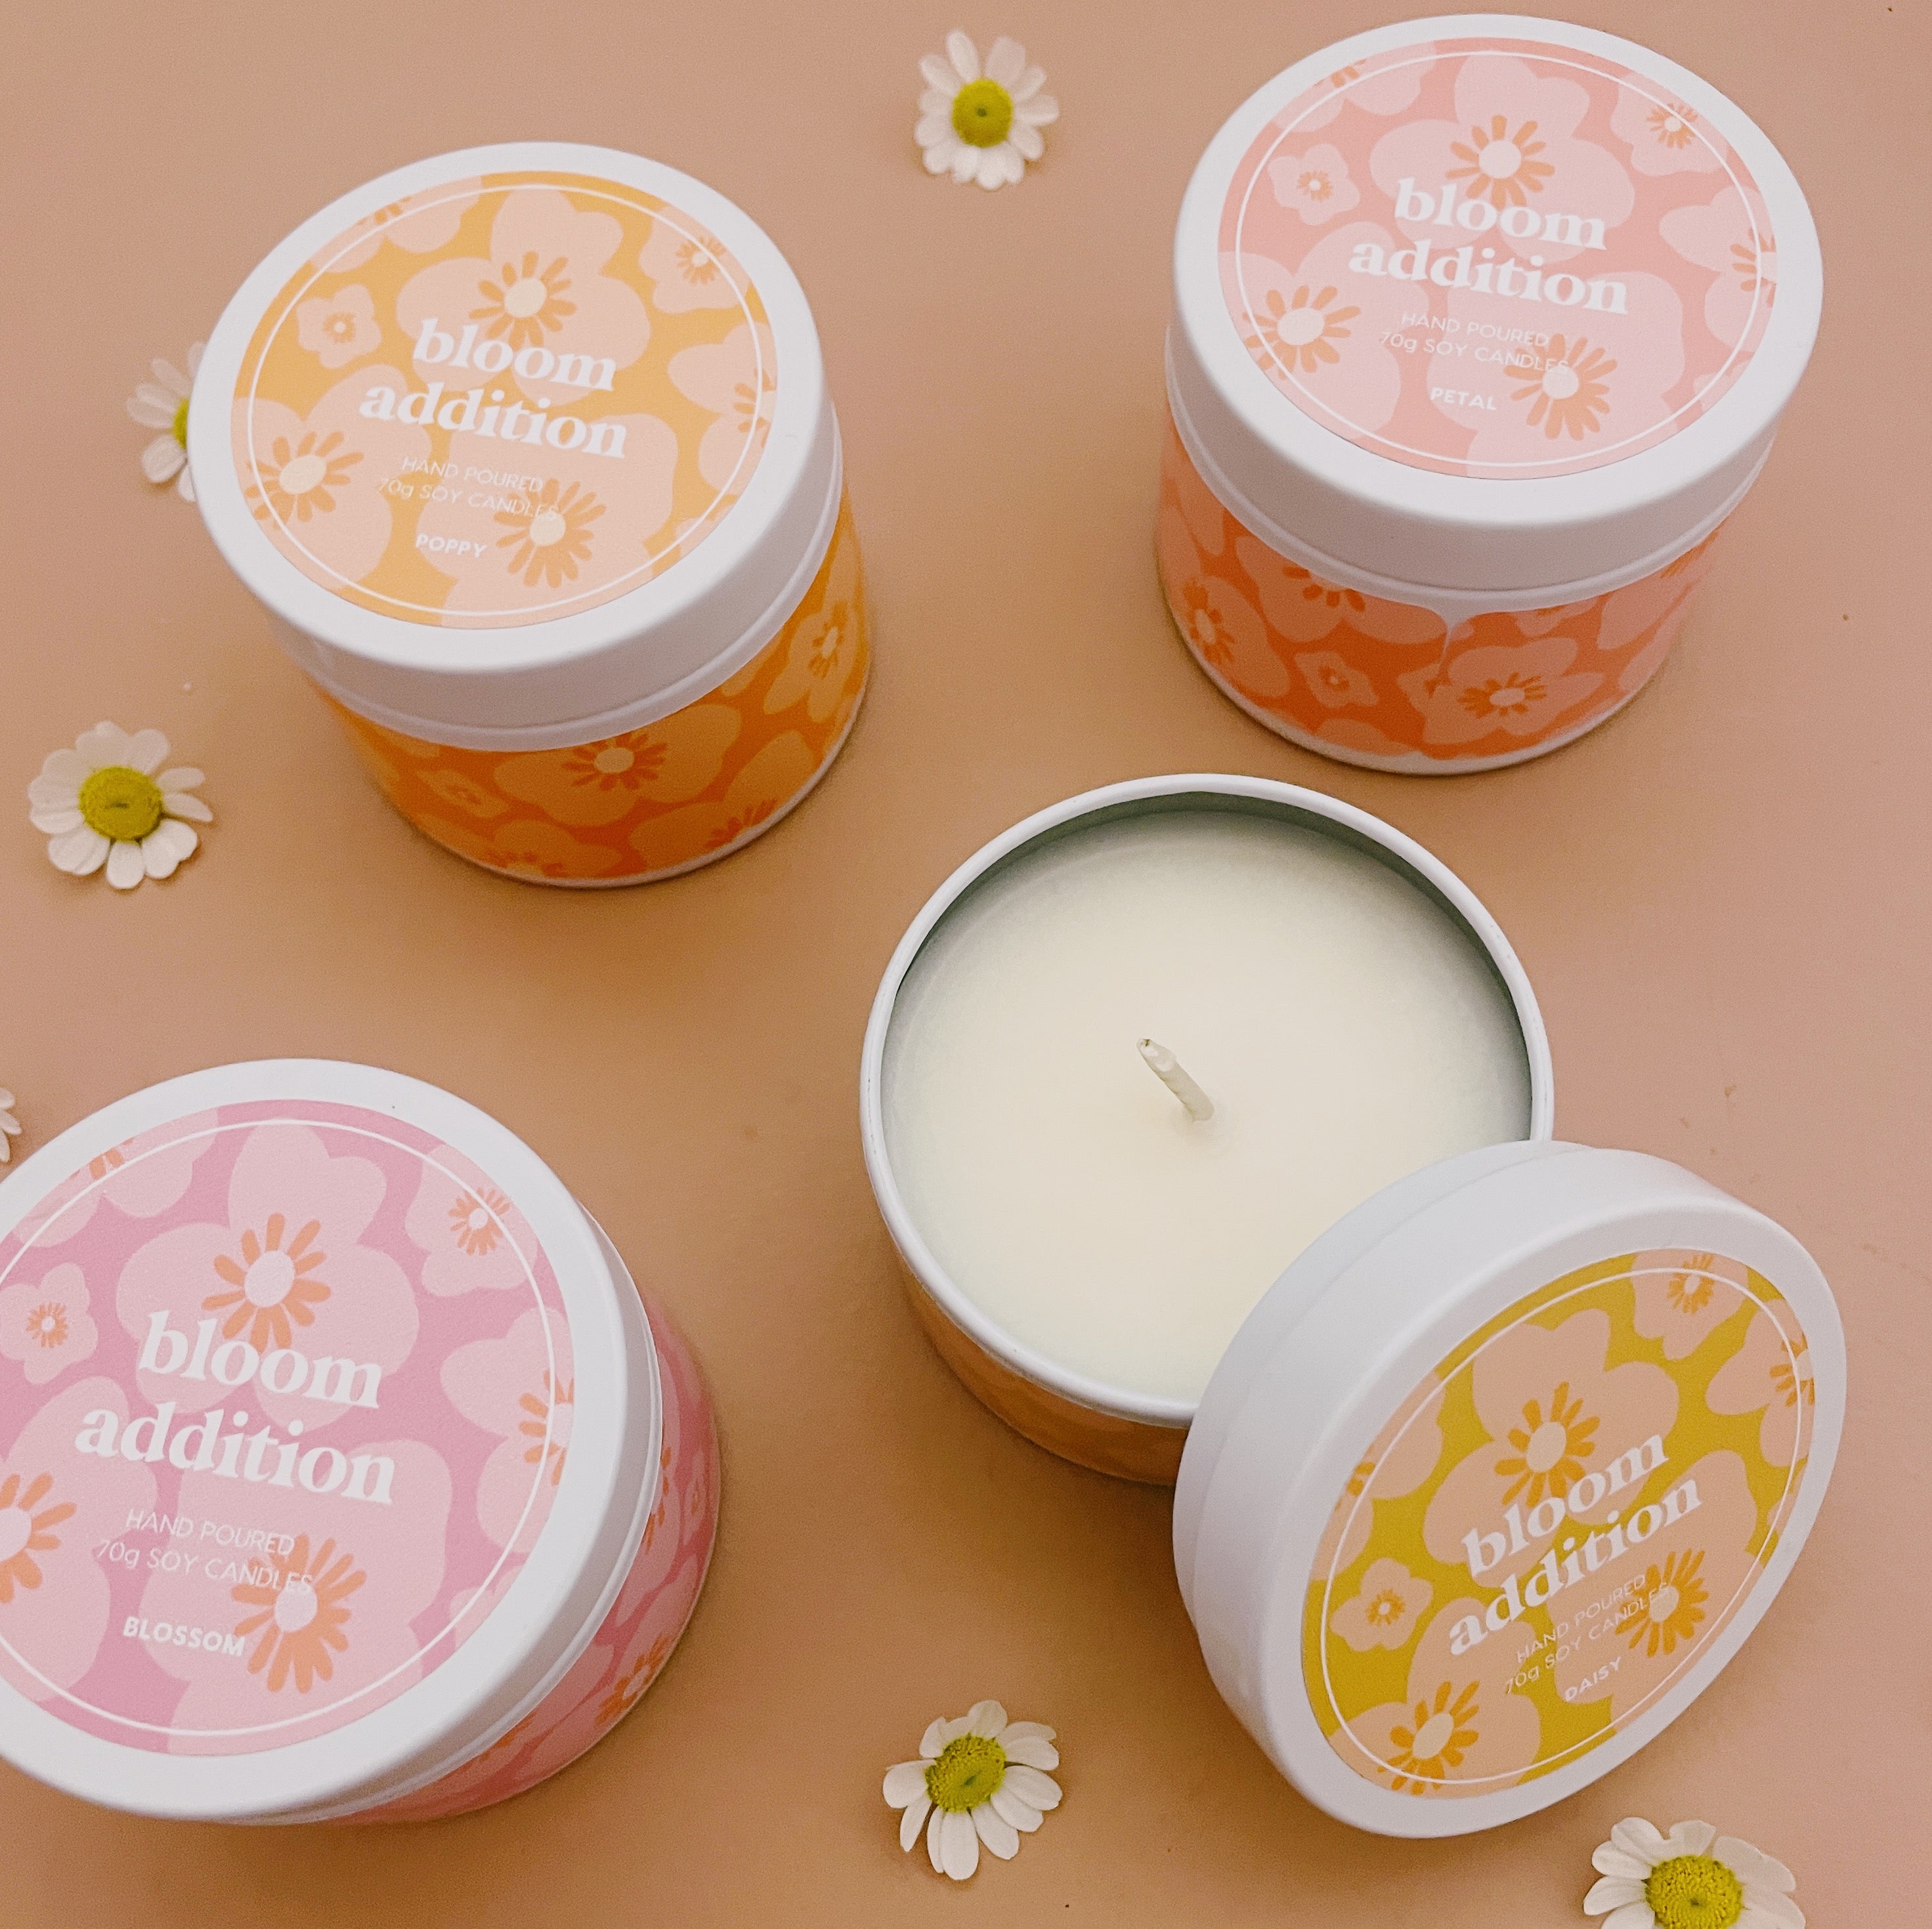 Bloom Addition Candle